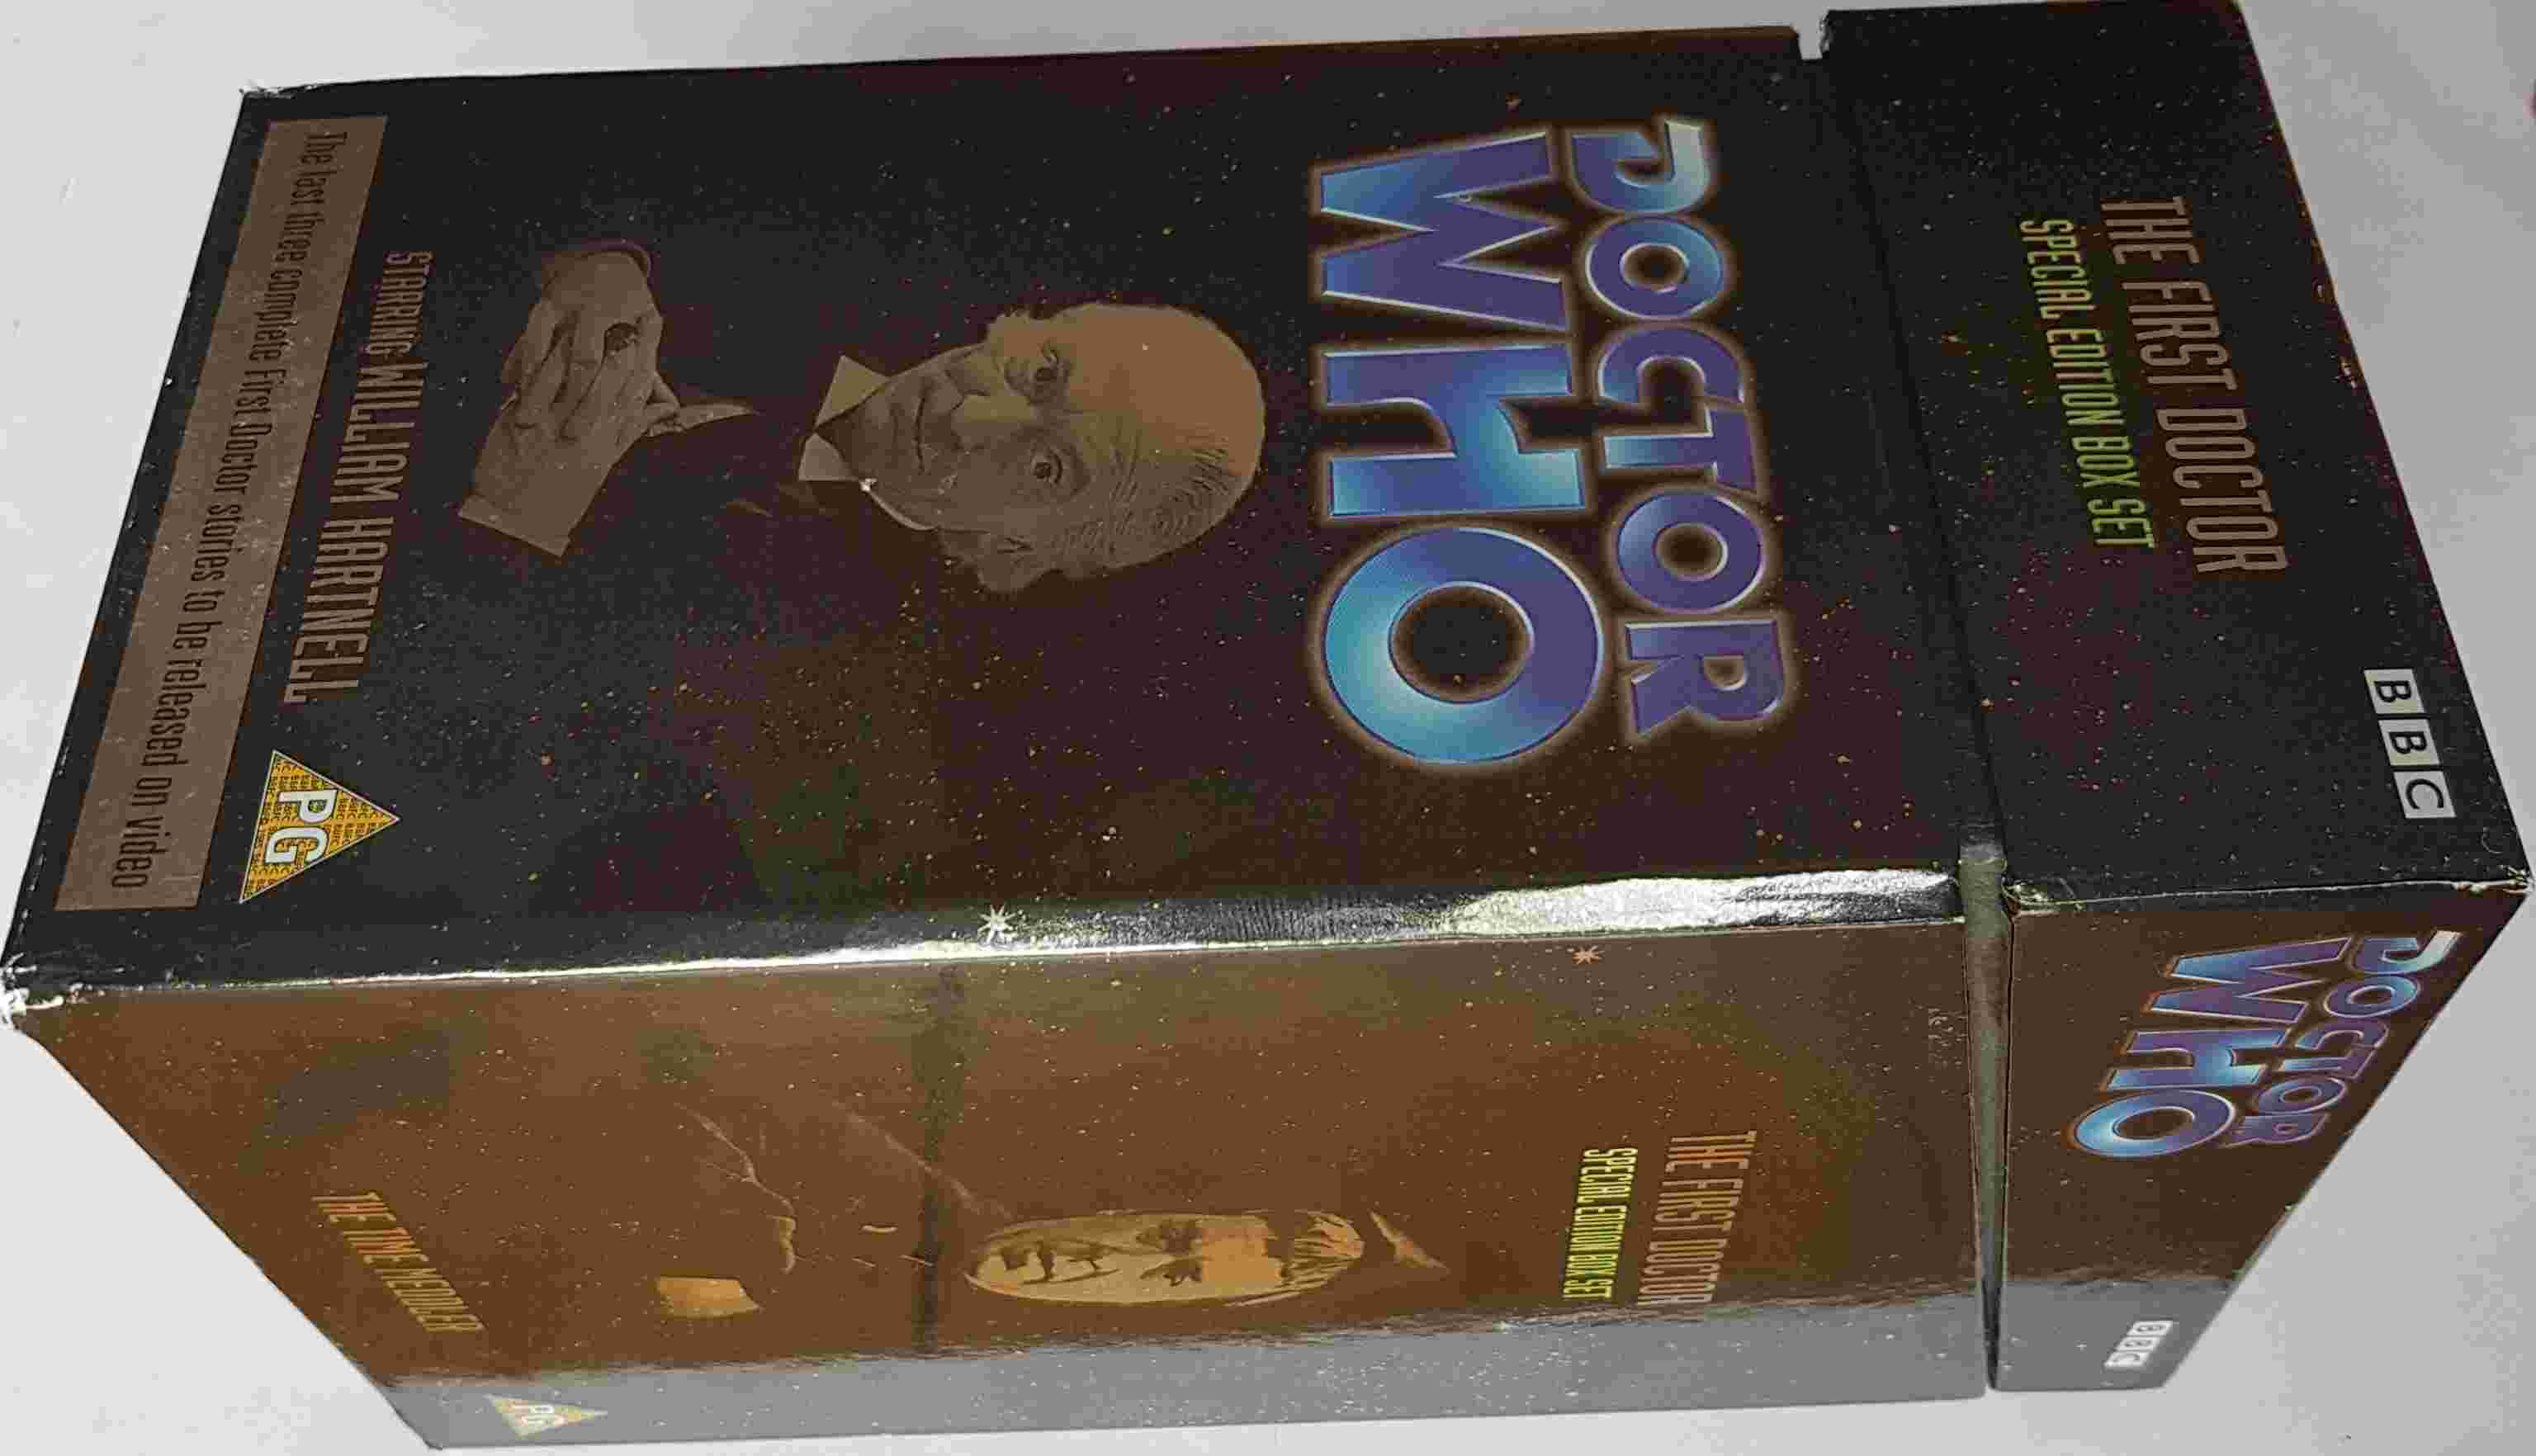 Picture of Doctor Who - The first doctor - Special edition boxed set by artist Peter R. Newman / Dennis Spooner / Donald Cotton from the BBC videos - Records and Tapes library